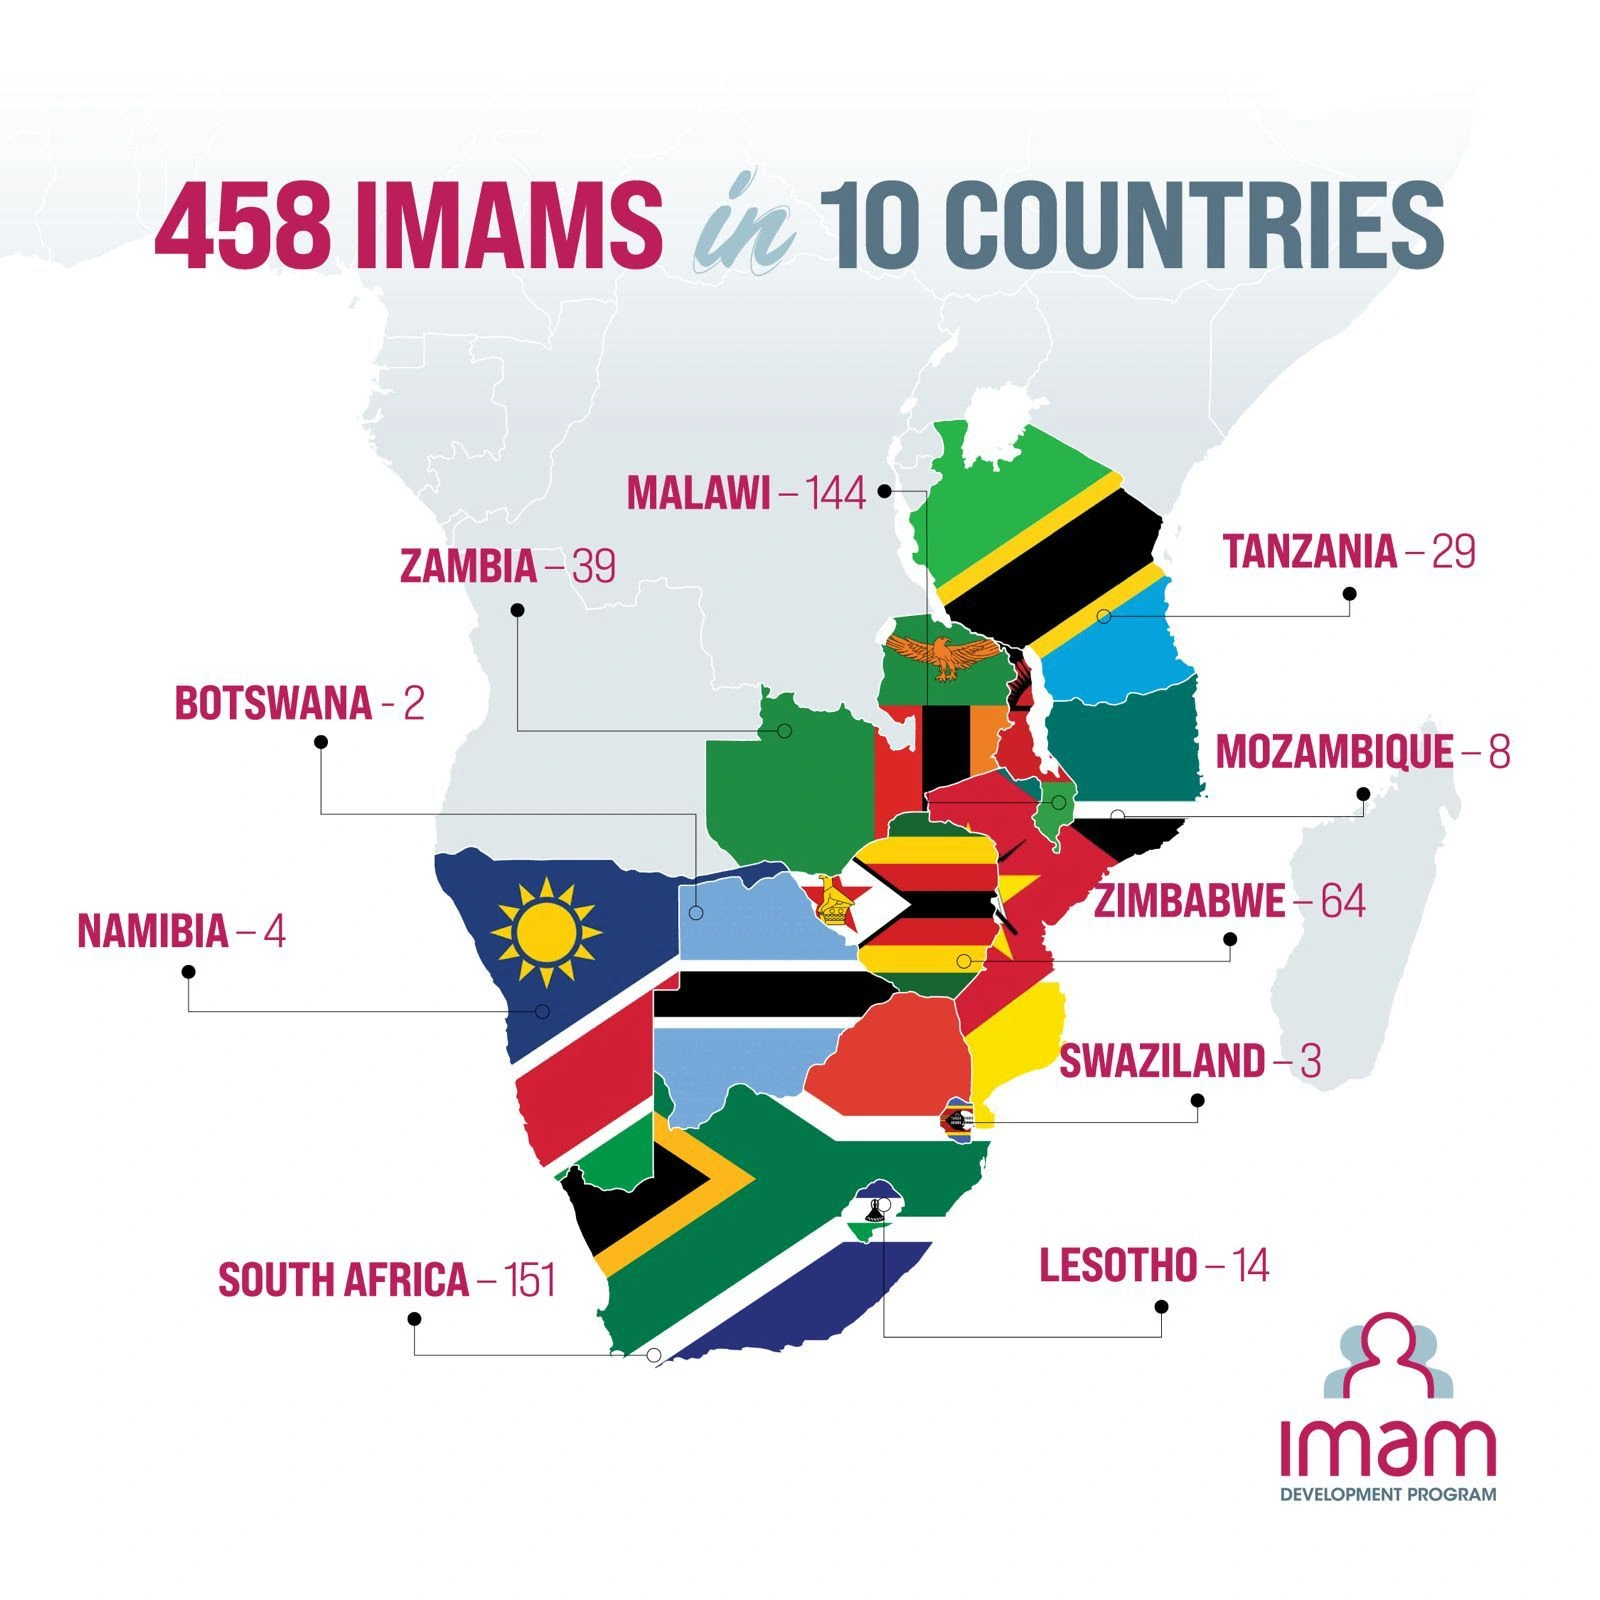 458 imams in 10 countries